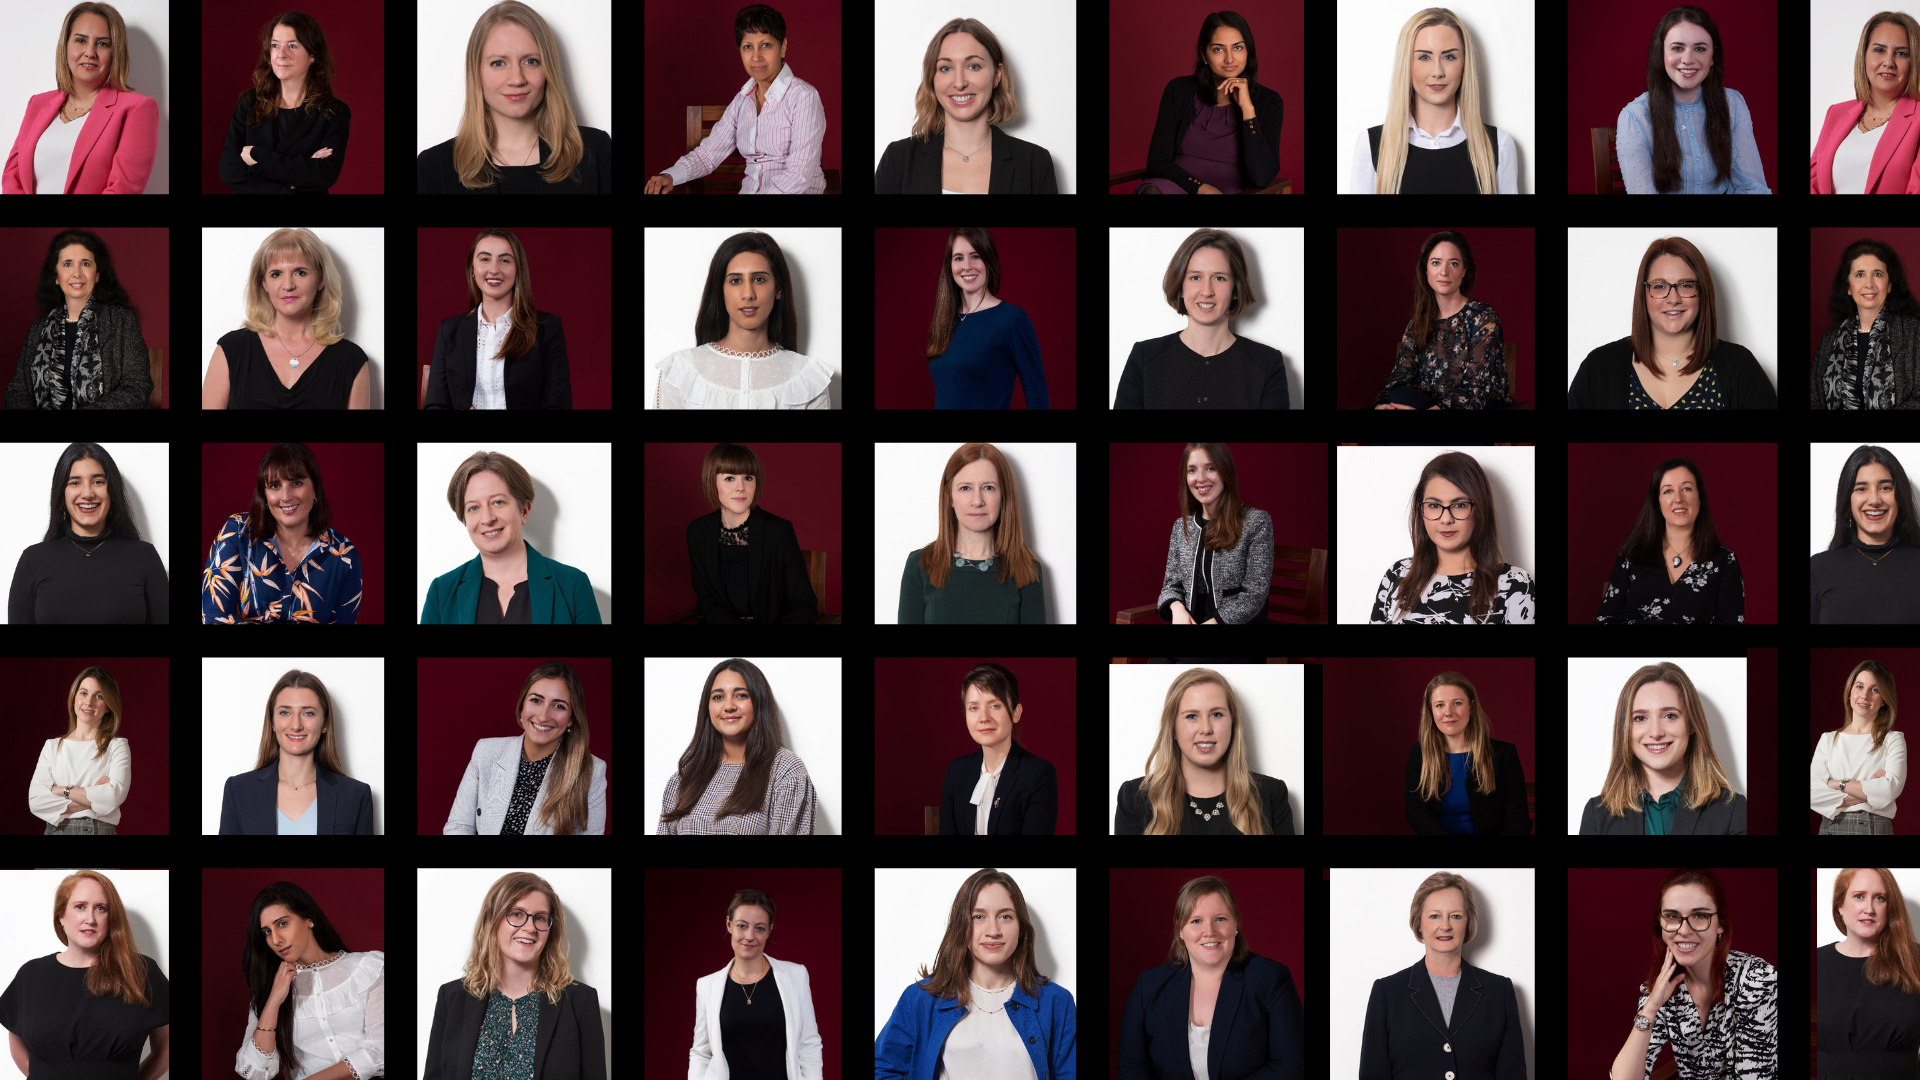 CB’s HigHer network: elevating women in the workplace